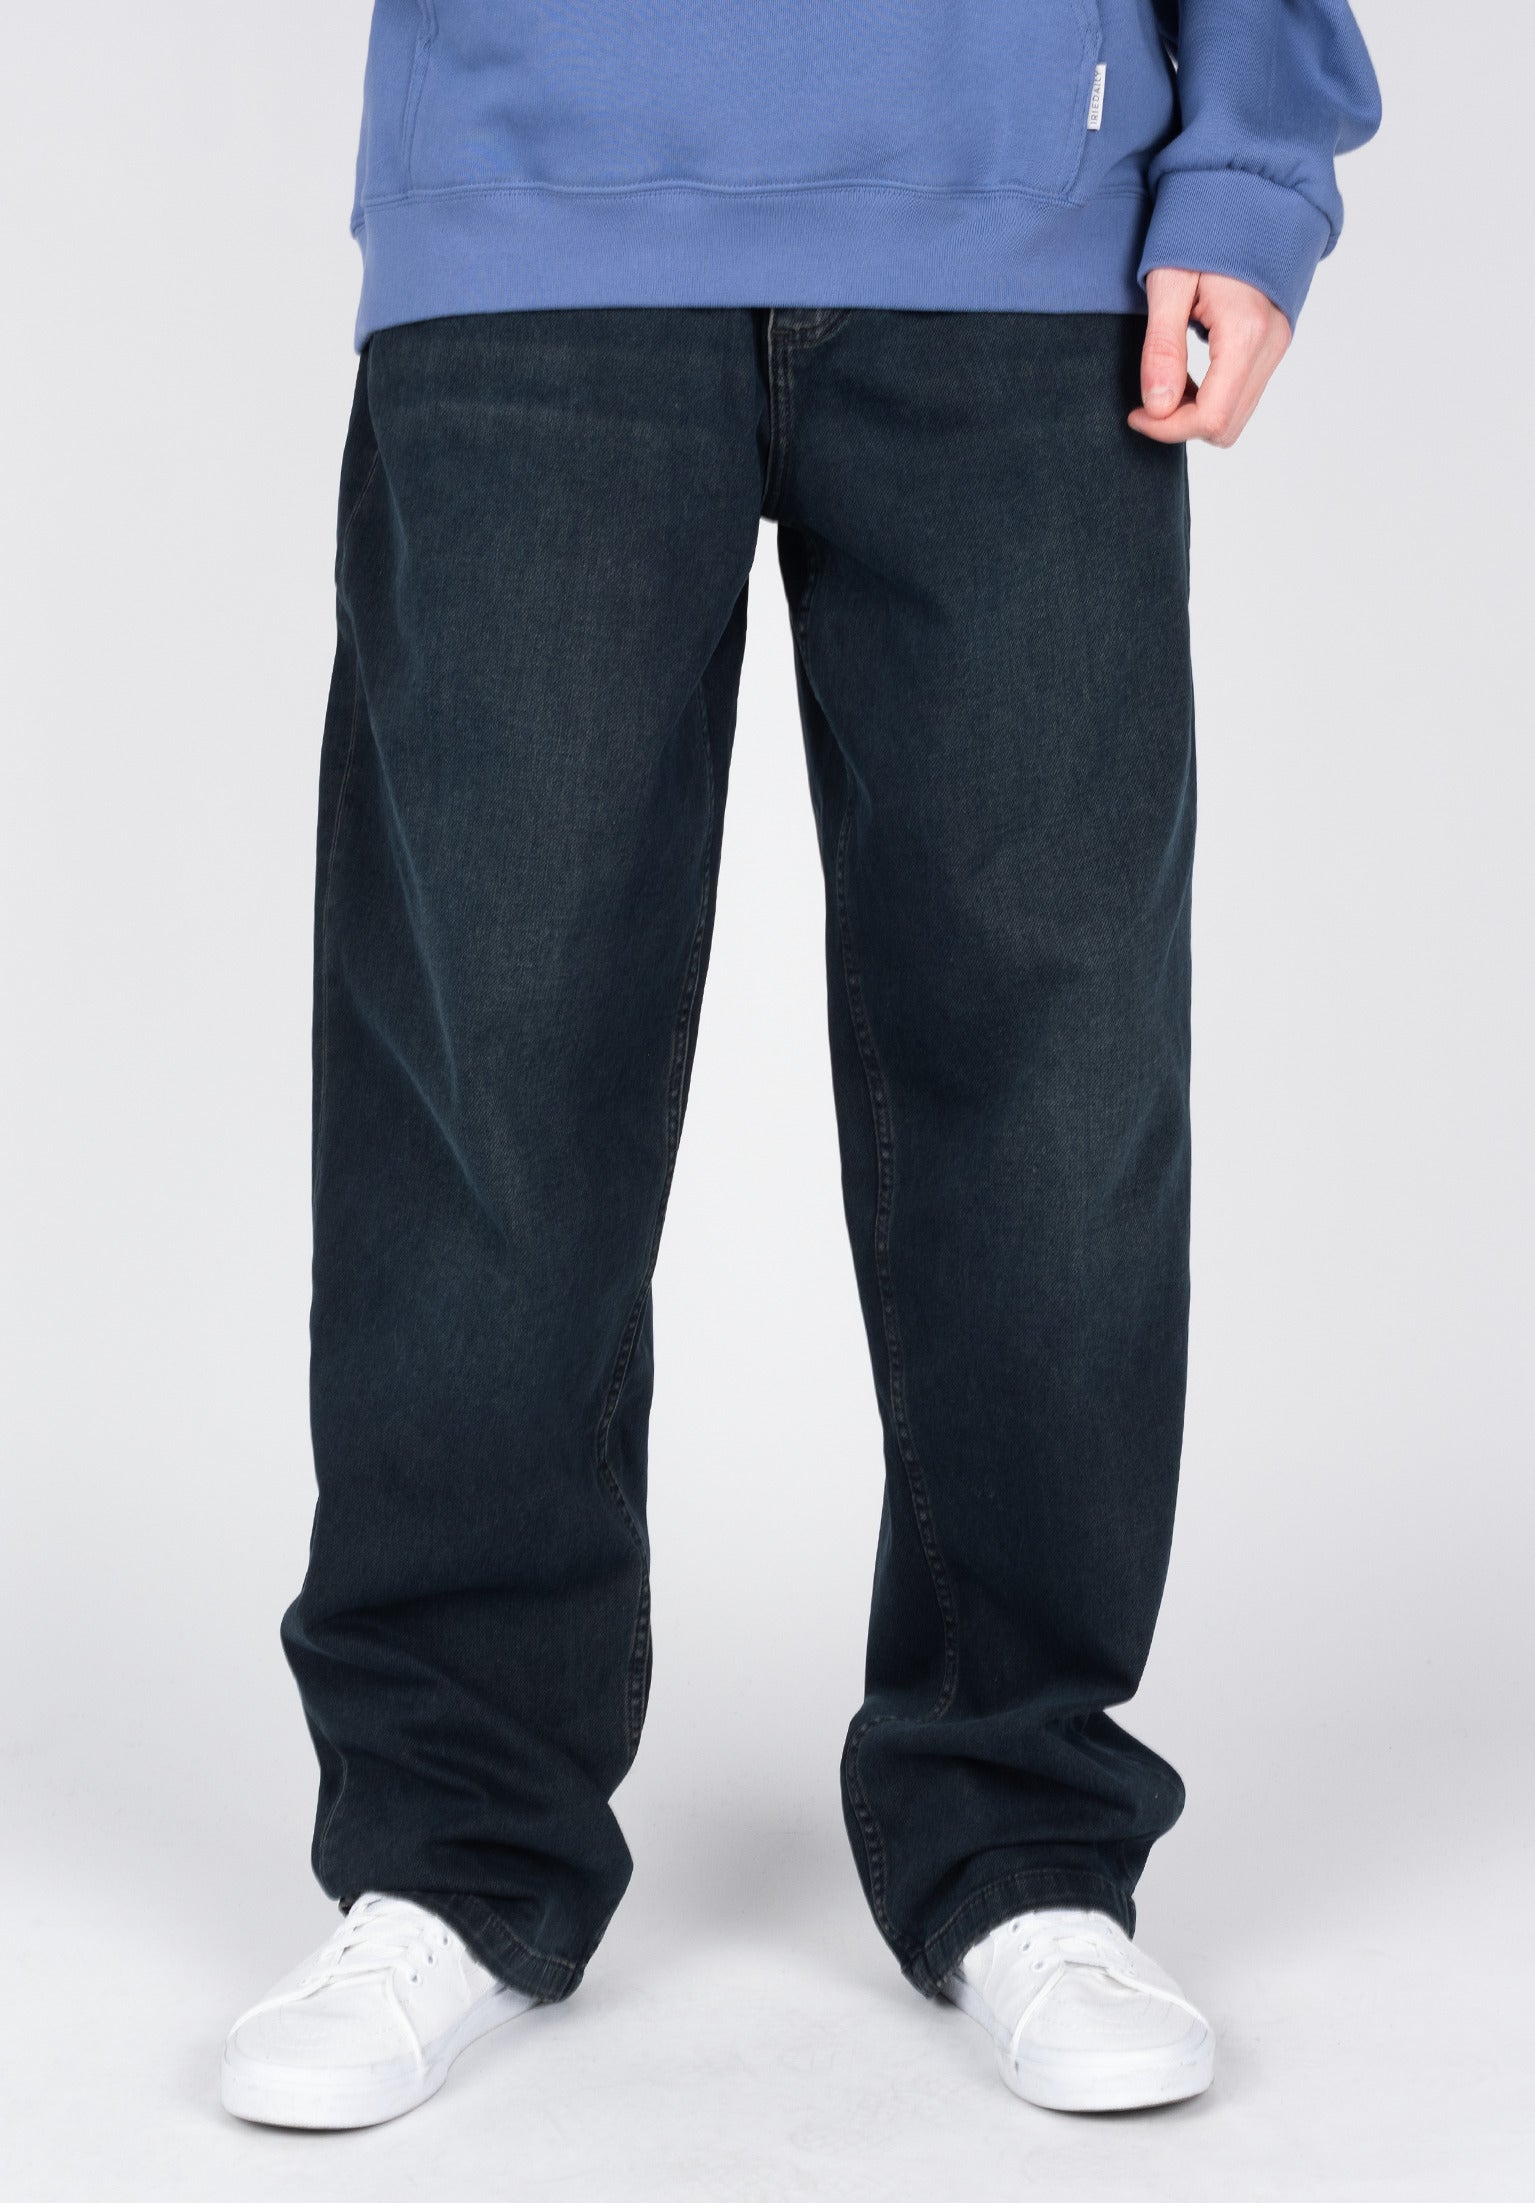 Baggy Reell Jeans in rusty for Men – TITUS